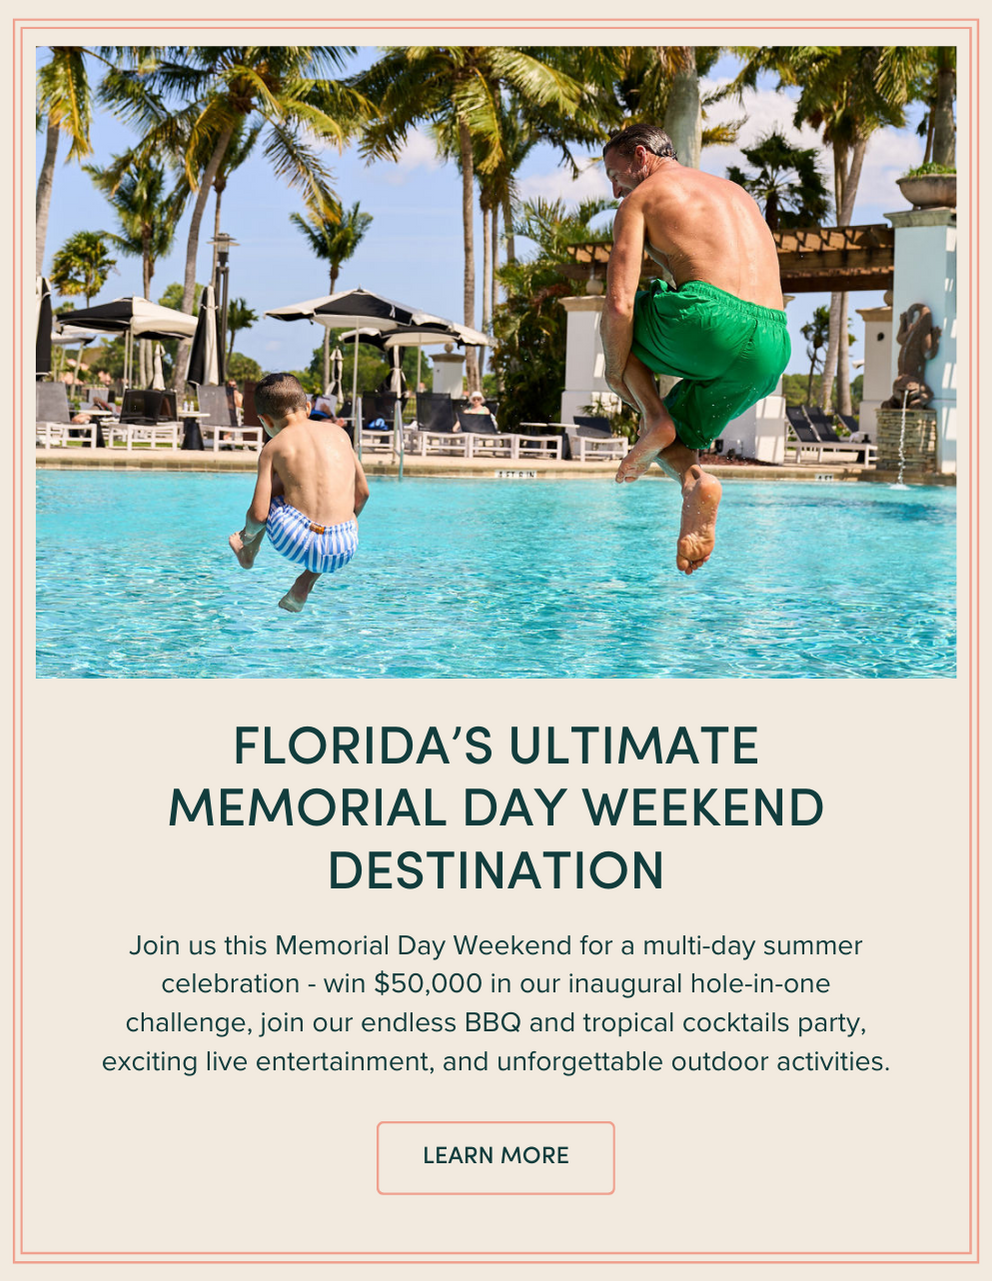 FLORIDA'S ULTIMATE MEMORIAL DAY WEEKEND DESTINATION: Join us this Memorial Day Weekend for a multi-day summer celebration - win $50,000 in our inaugural hole-in-one challenge, join our endless BBQ and tropical cocktails party, exciting live entertainment, and unforgettable outdoor activities.